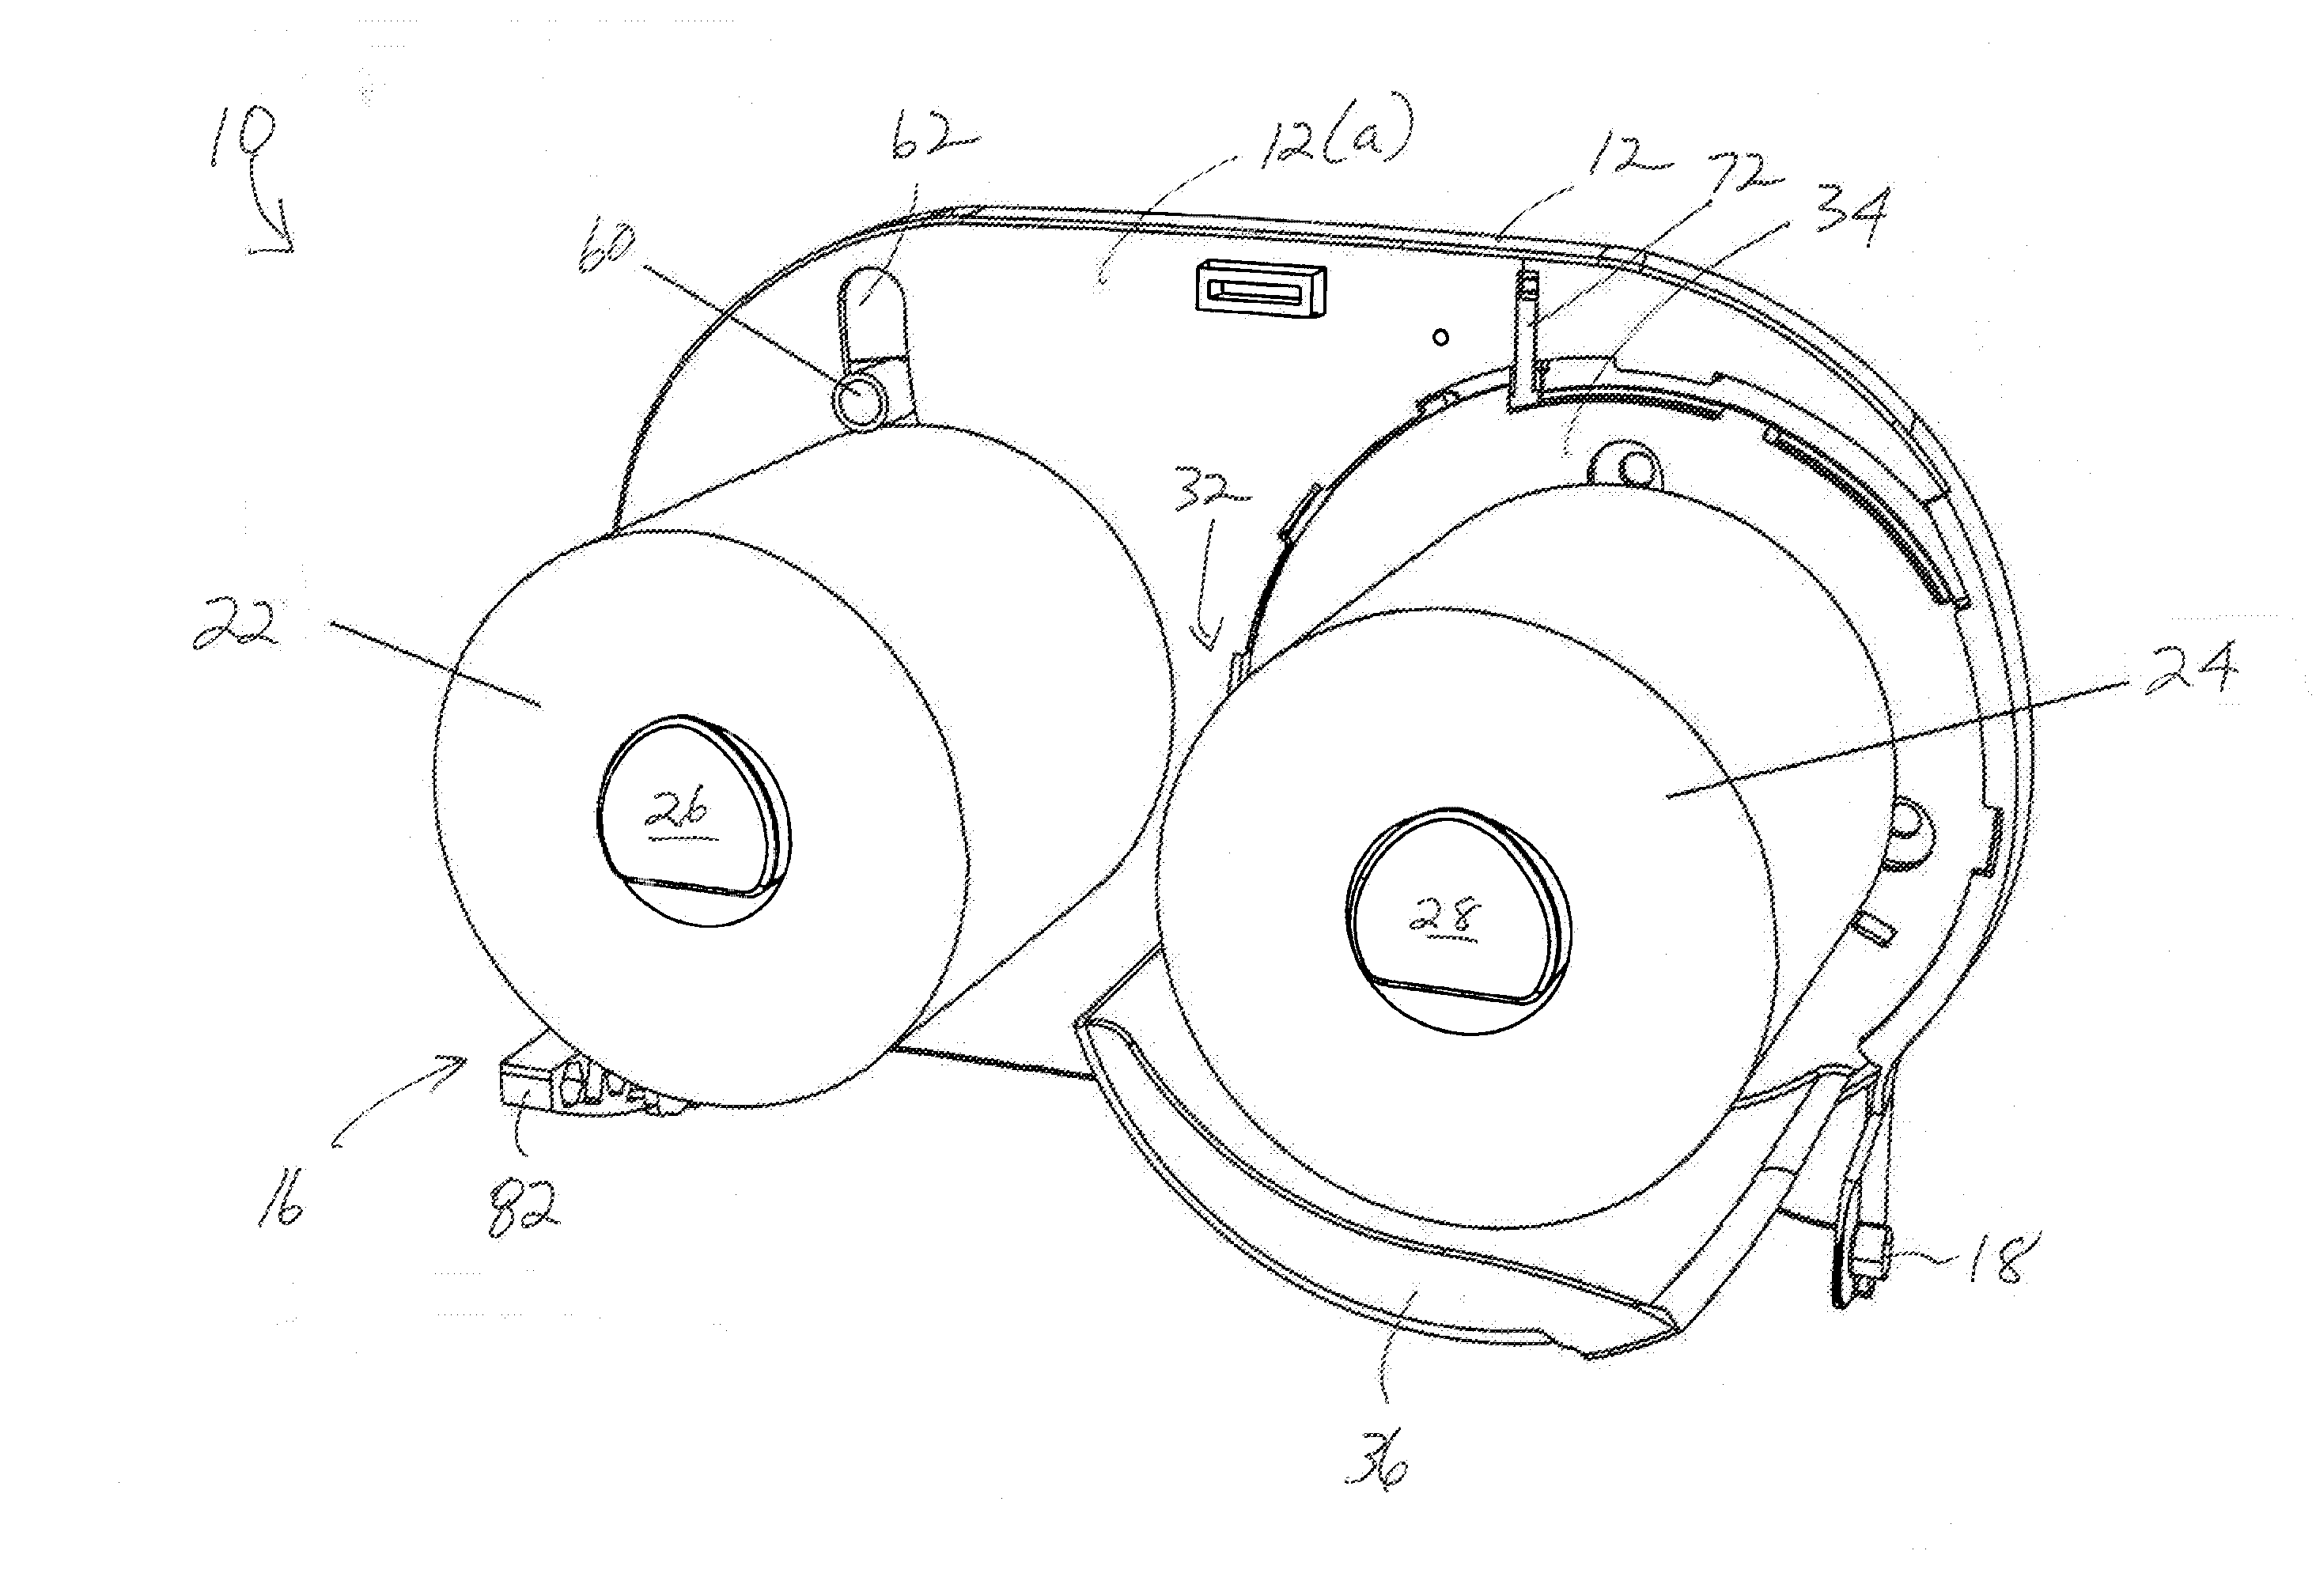 Reset linkage assembly for blocking shield of multi-roll paper dispenser